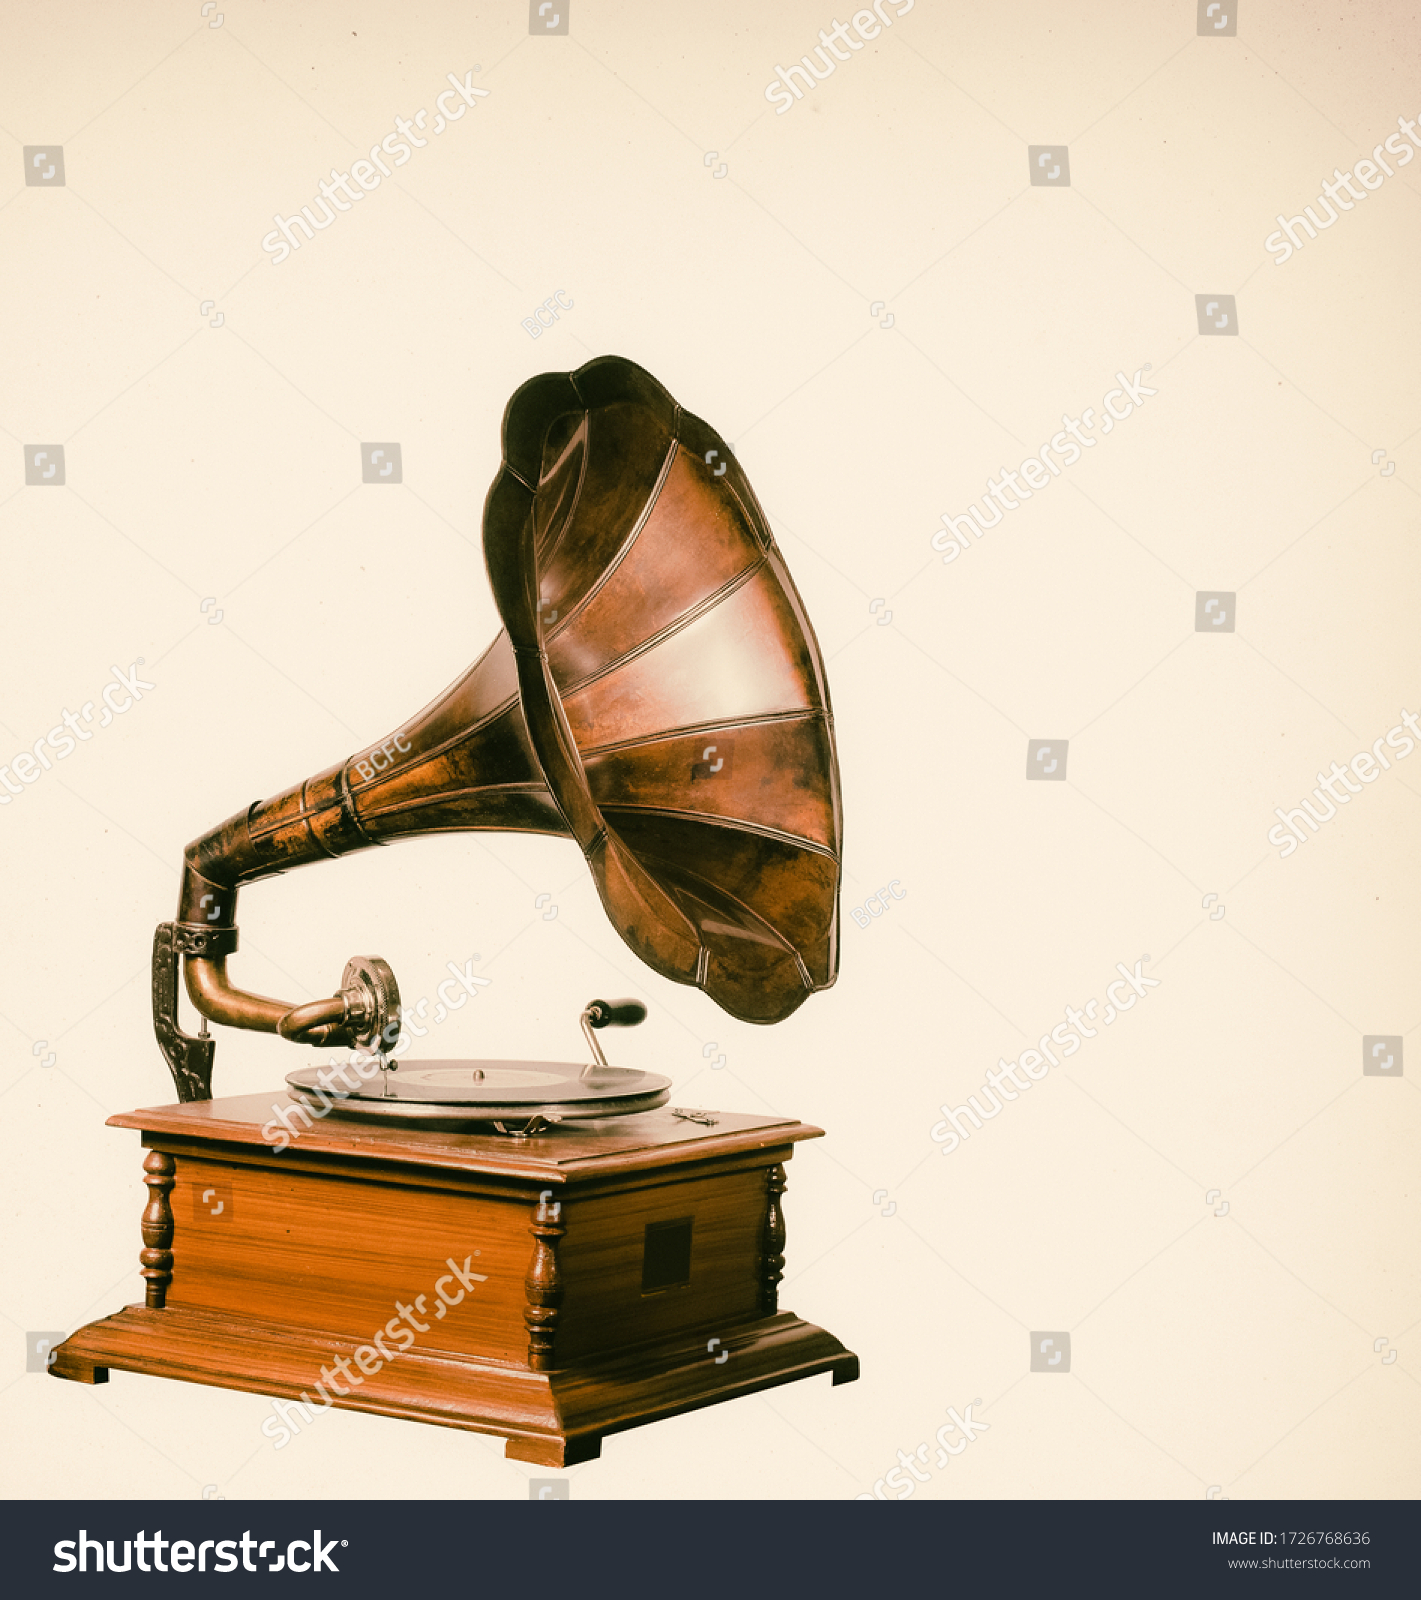 Vintage gramophone player with vinyl record.  #1726768636